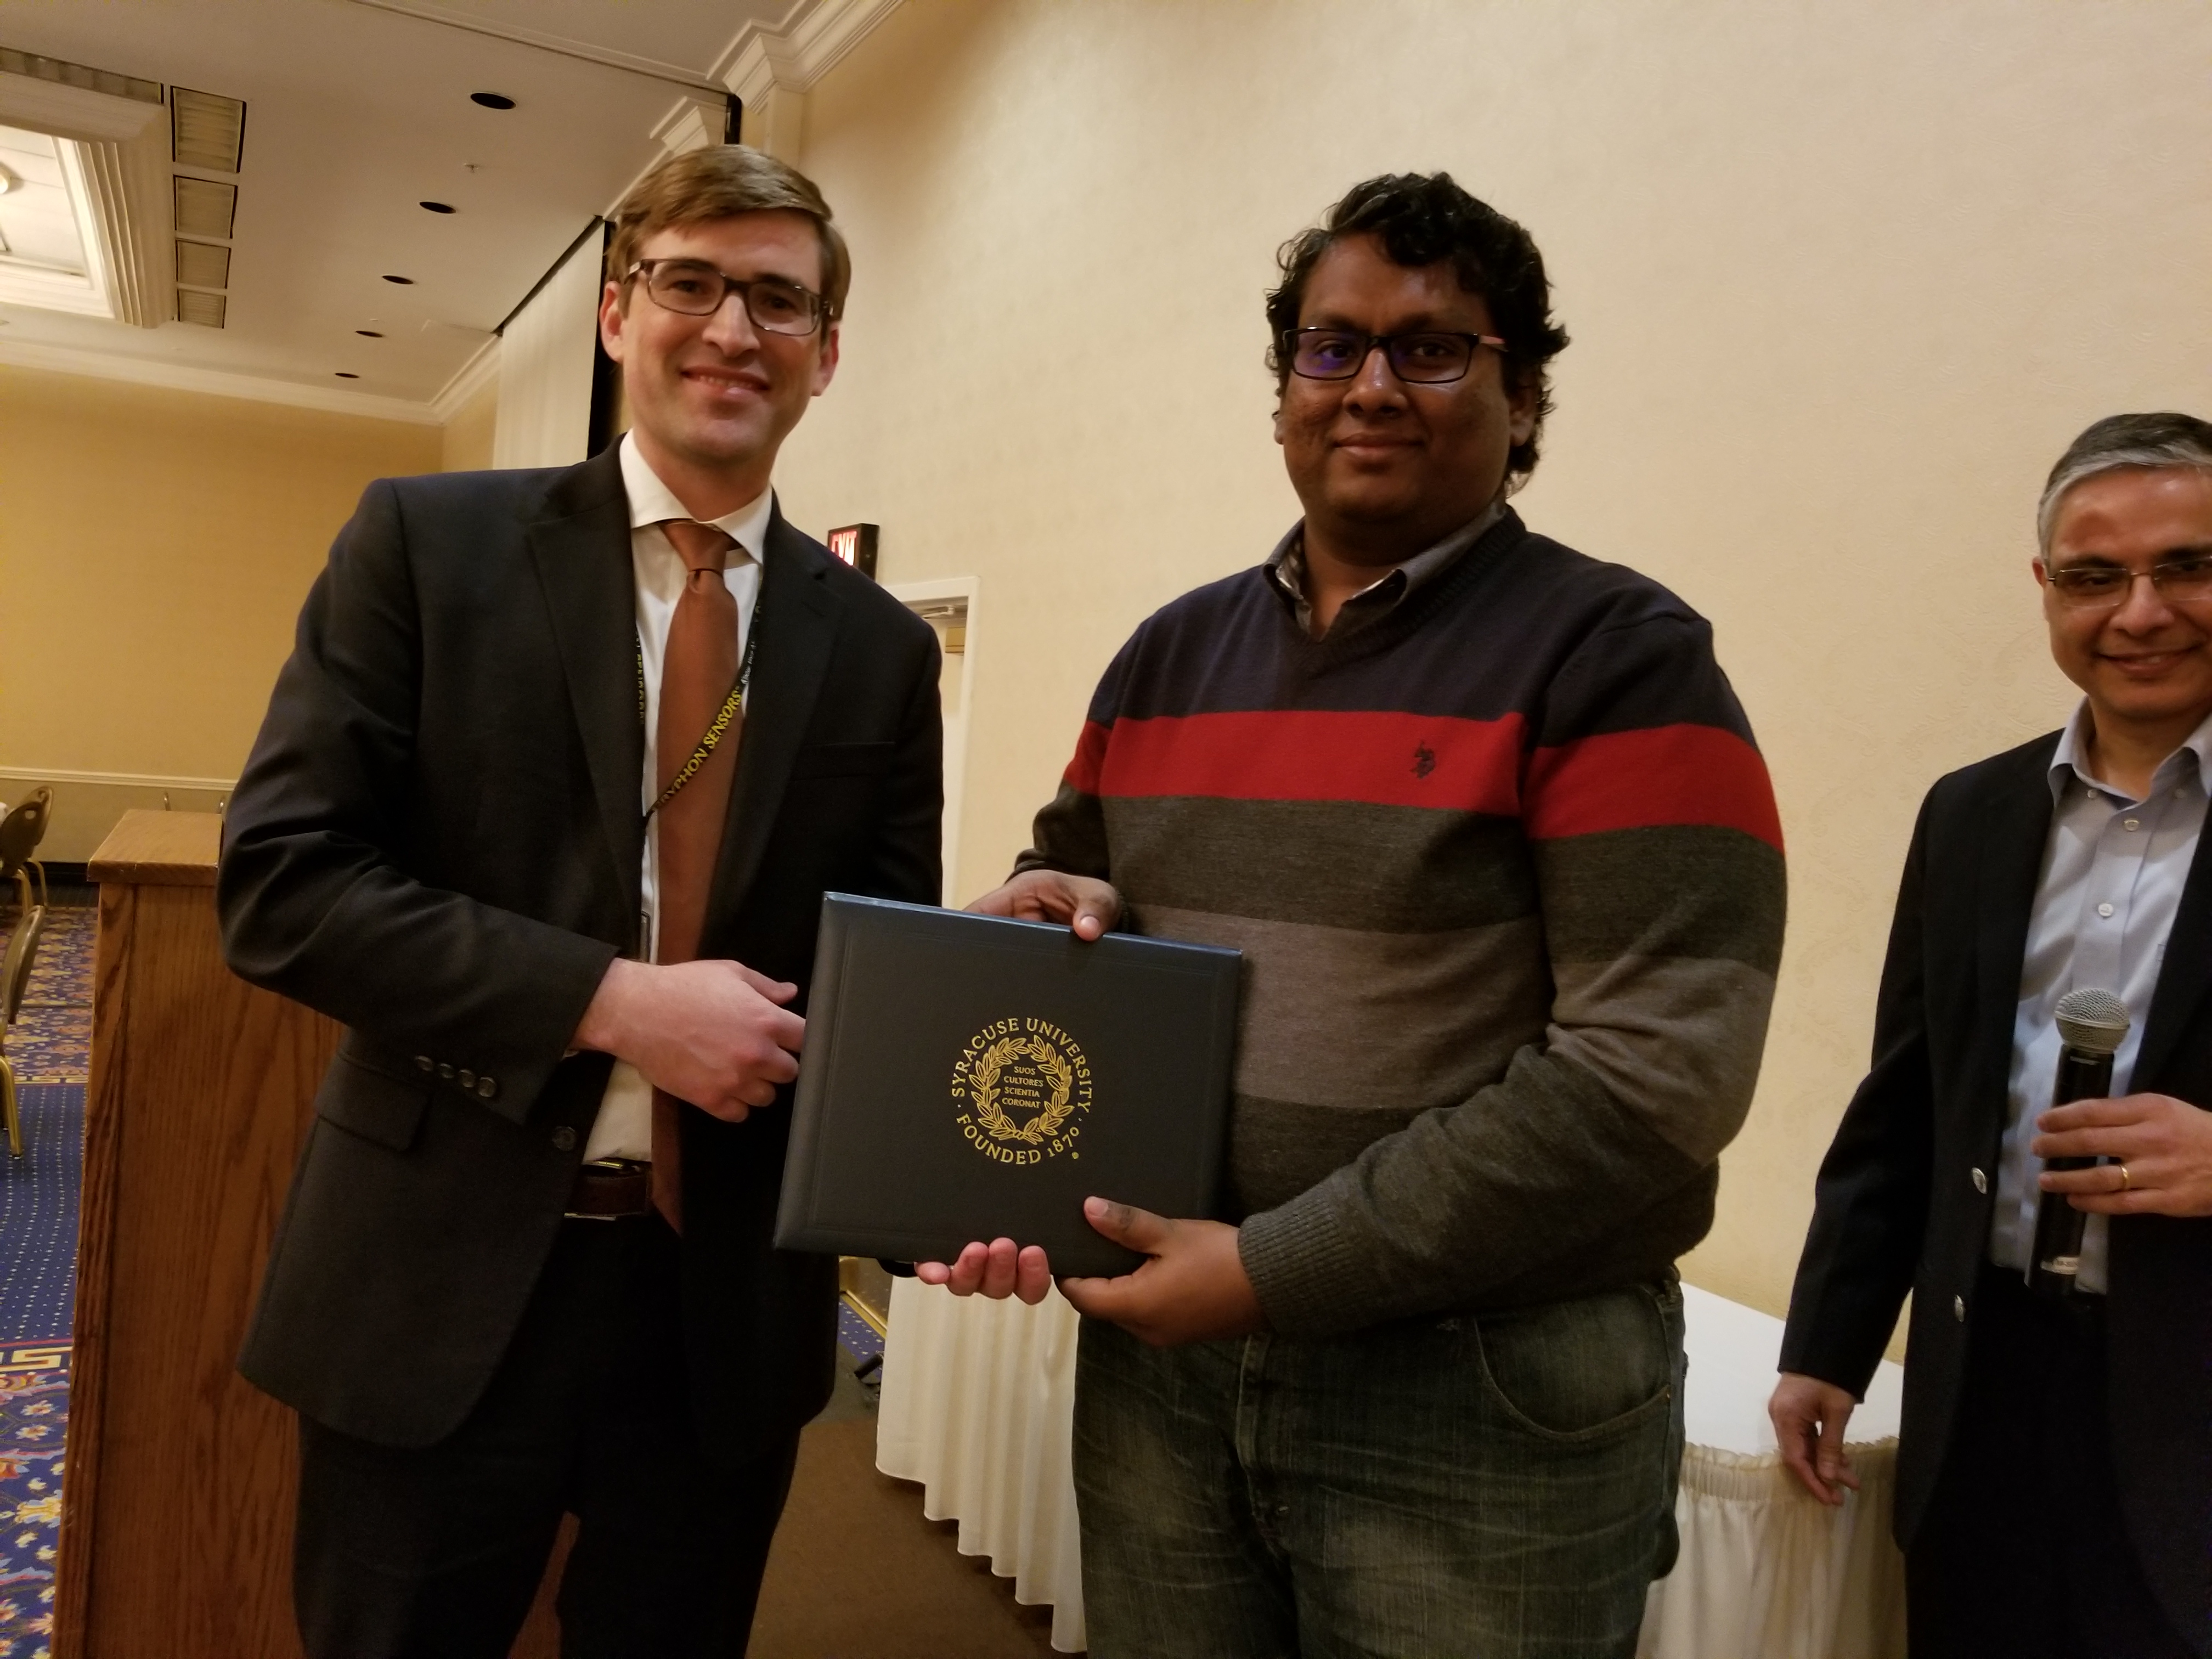 Graduate Student Pitch Competition Winner Flaviyan Jerome Irudayanathan with judge Craig Marcinkowski from Gryphon Sensors.